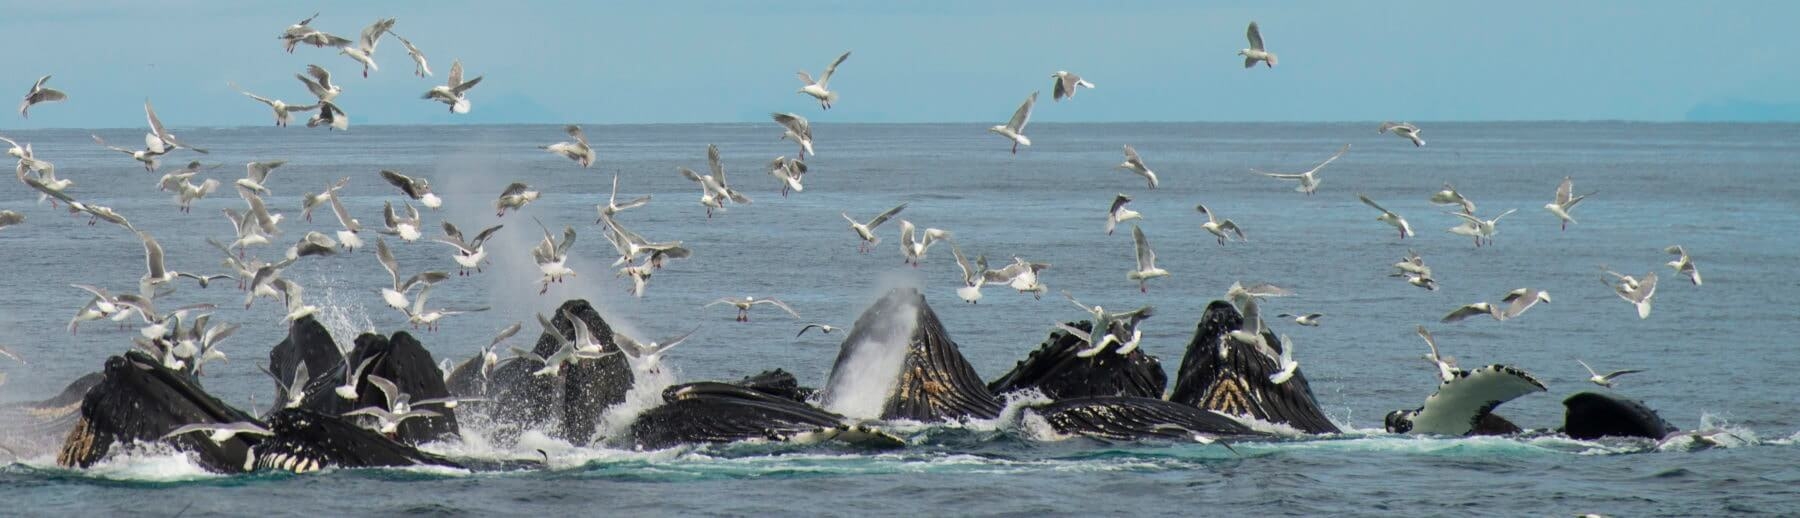 World Whale Day February 16th 2019 Major Marine Tours